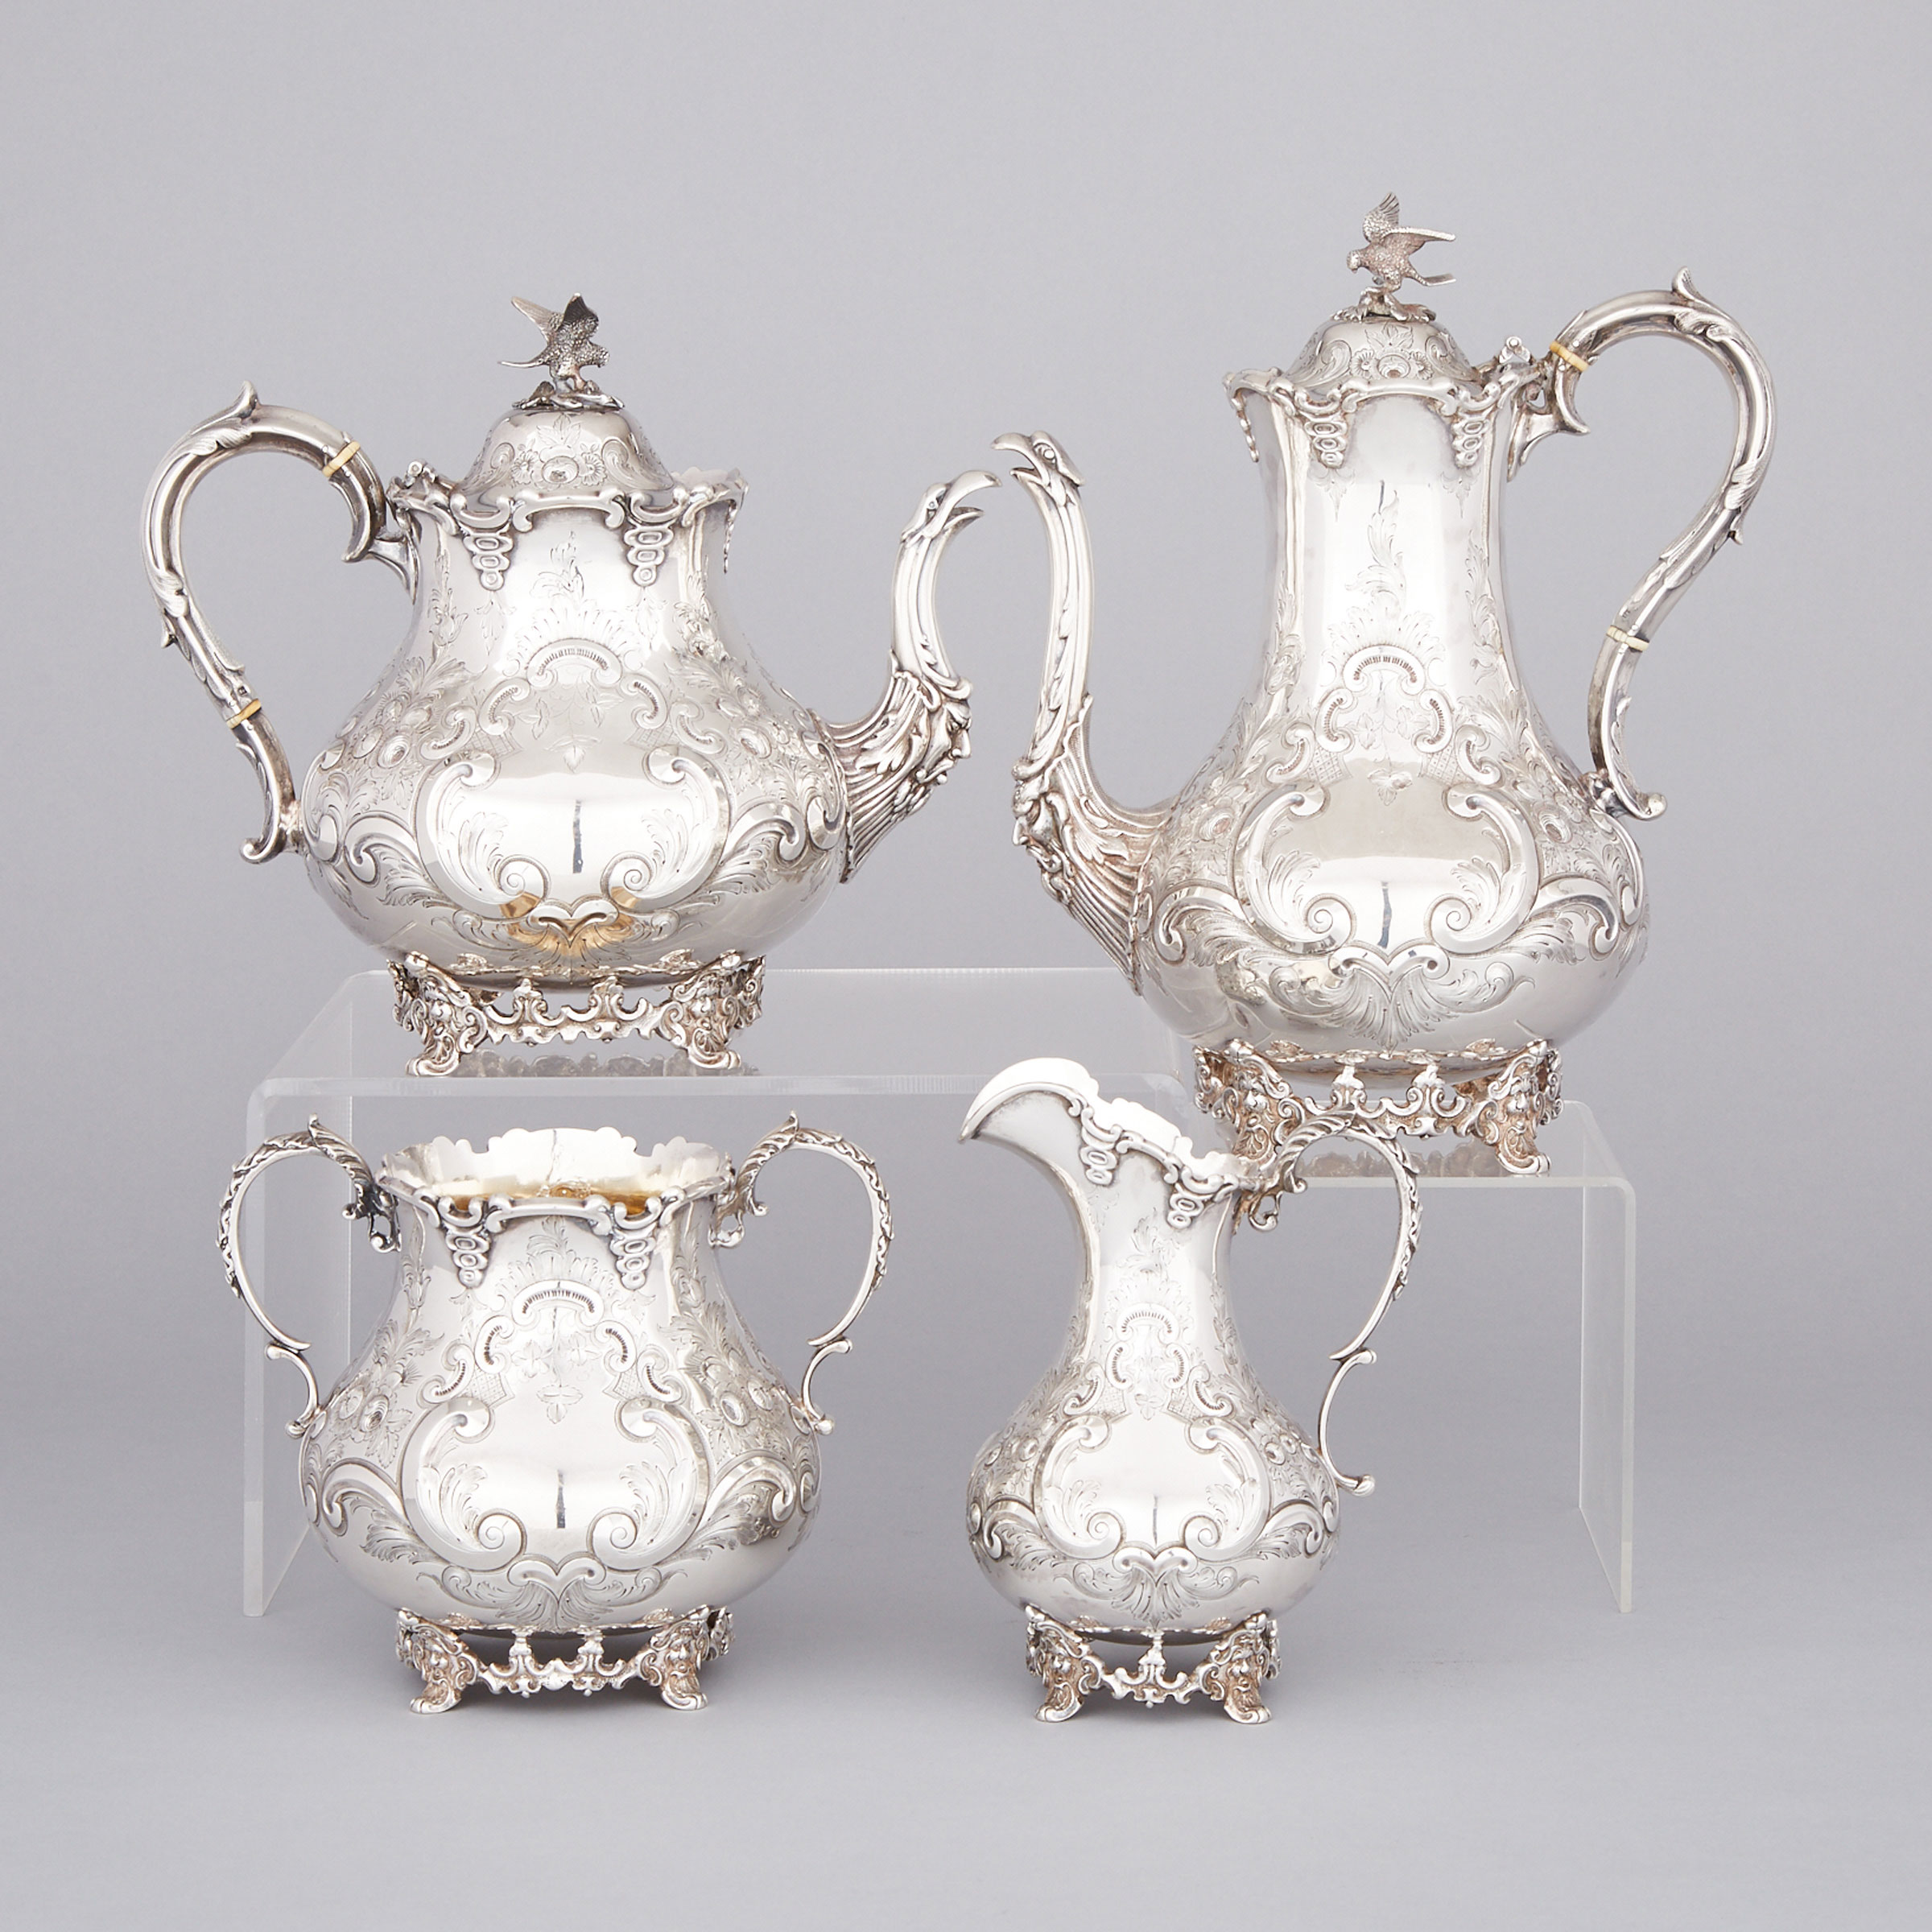 Victorian Silver Tea and Coffee Service, Roberts & Belk, Sheffield, 1875